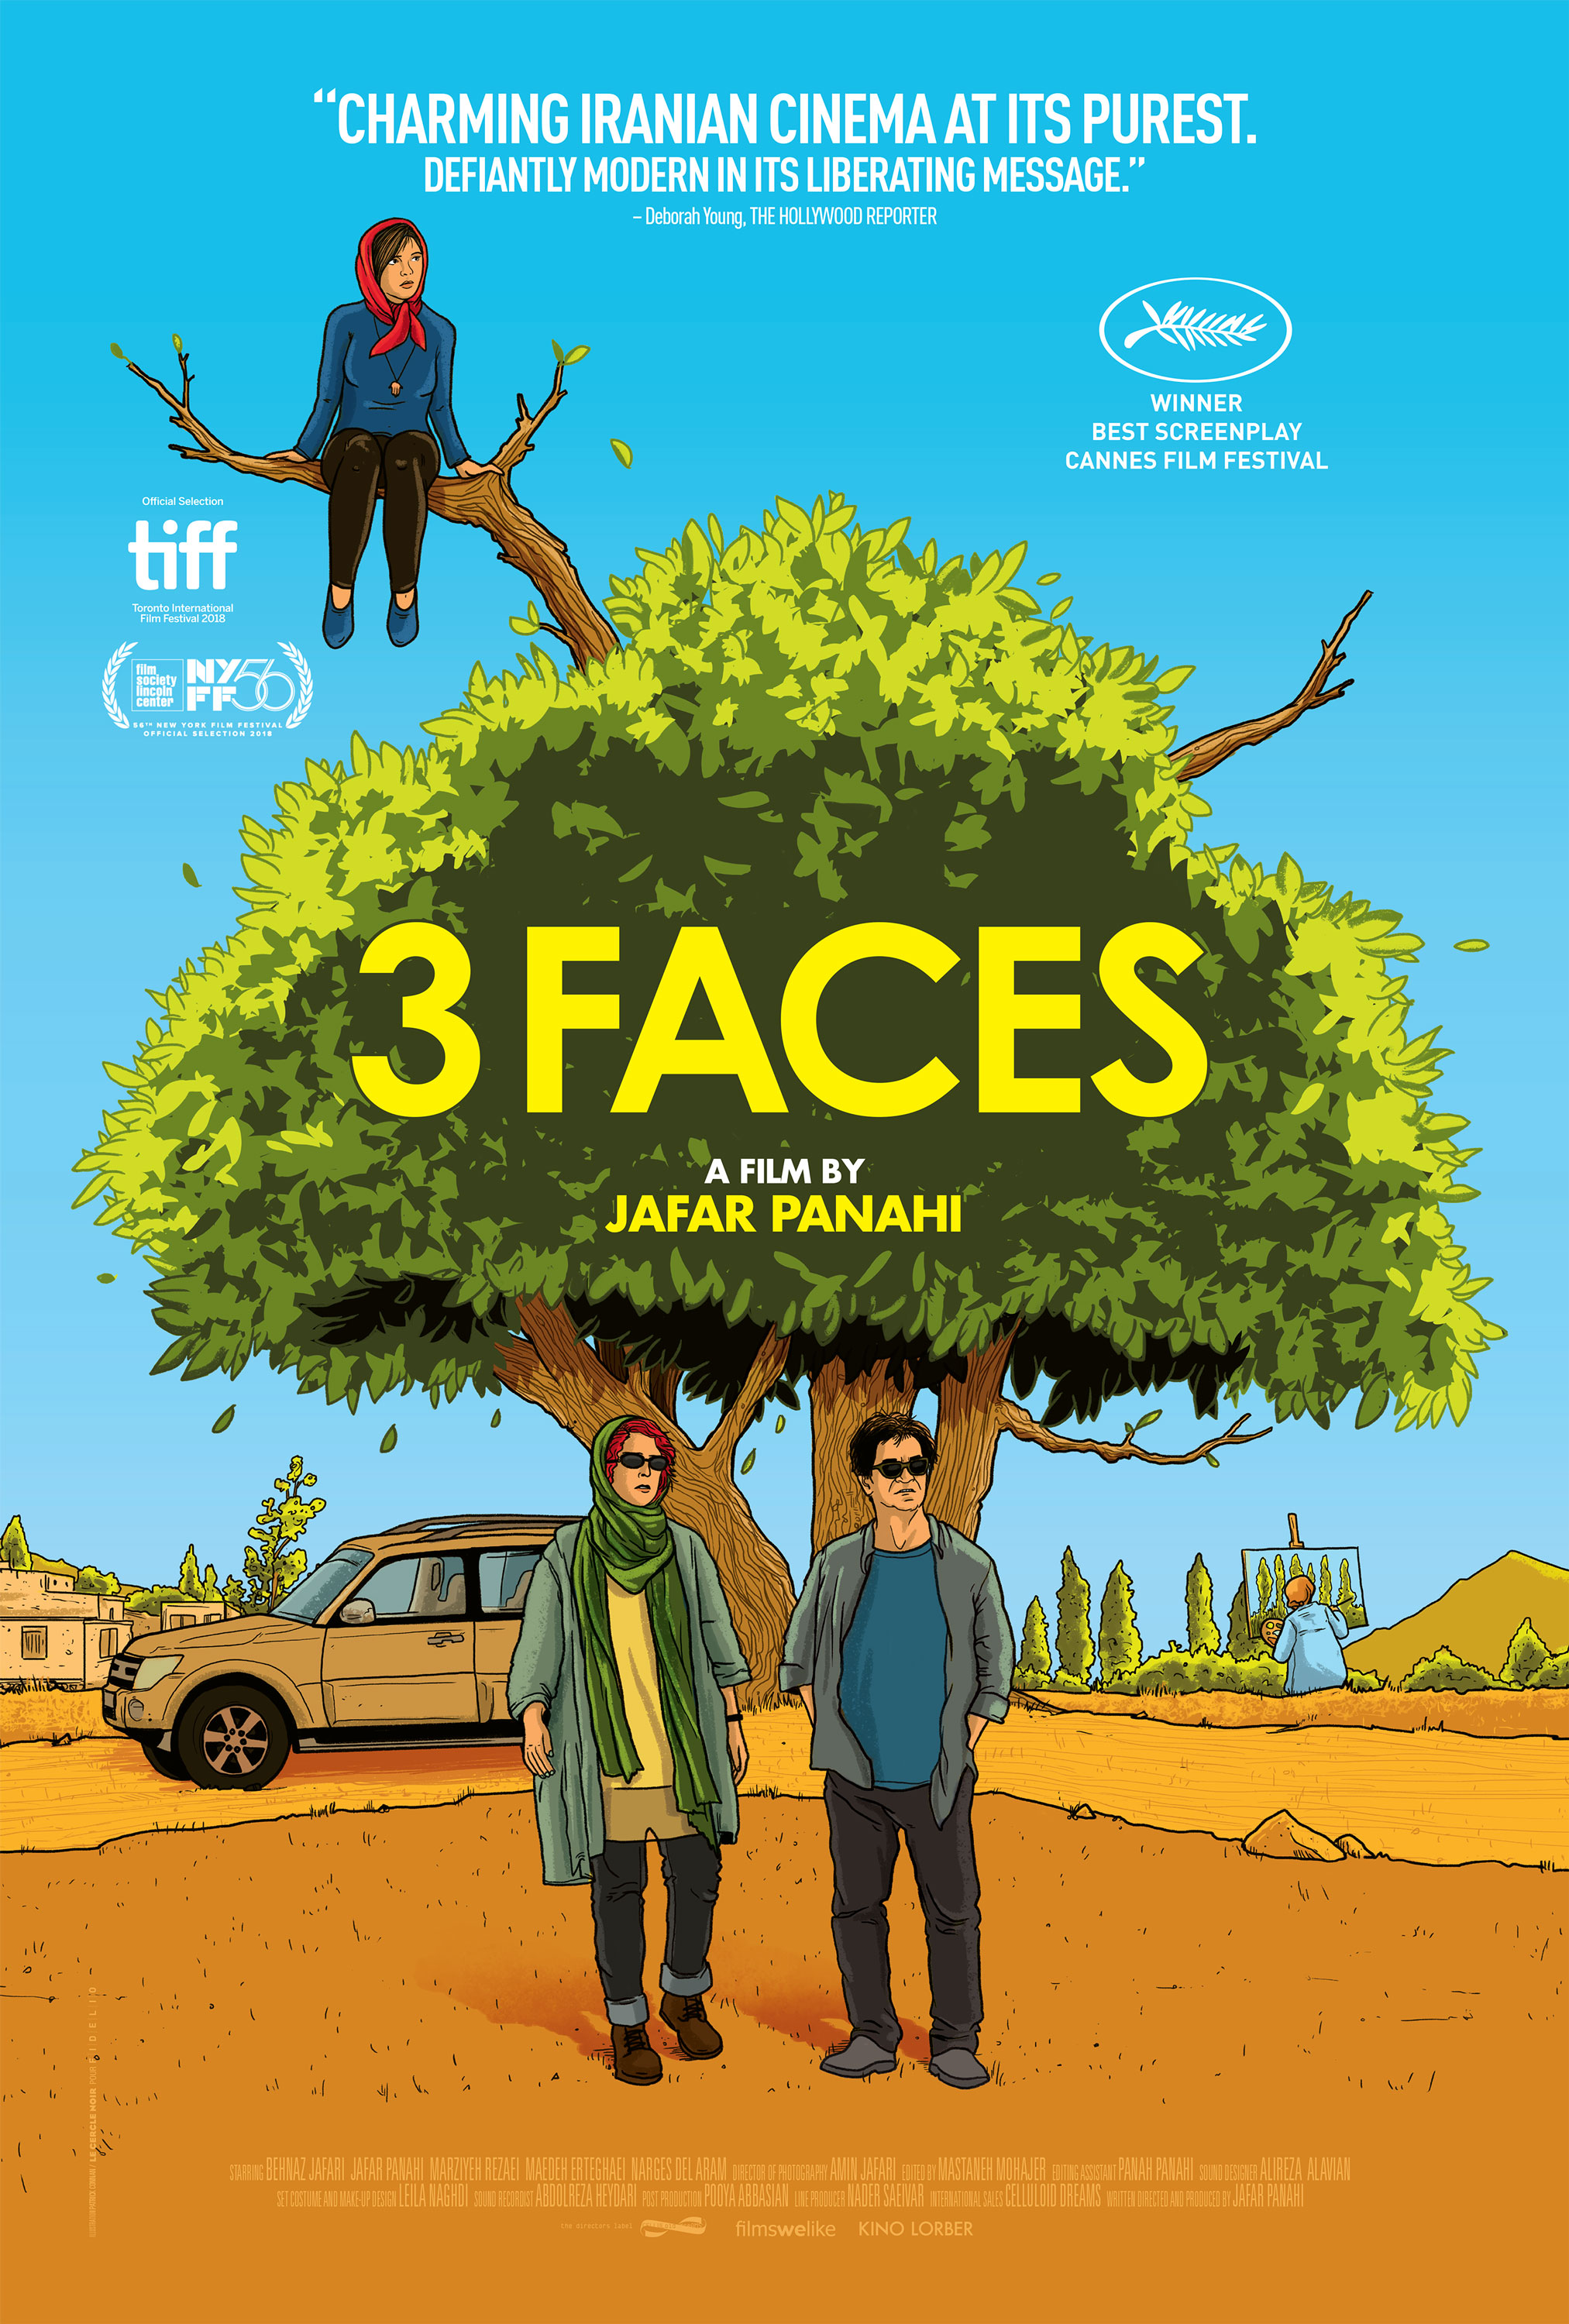 Film poster of Jafar Panahiʹs "Three Faces" (distributed by Memento Films)